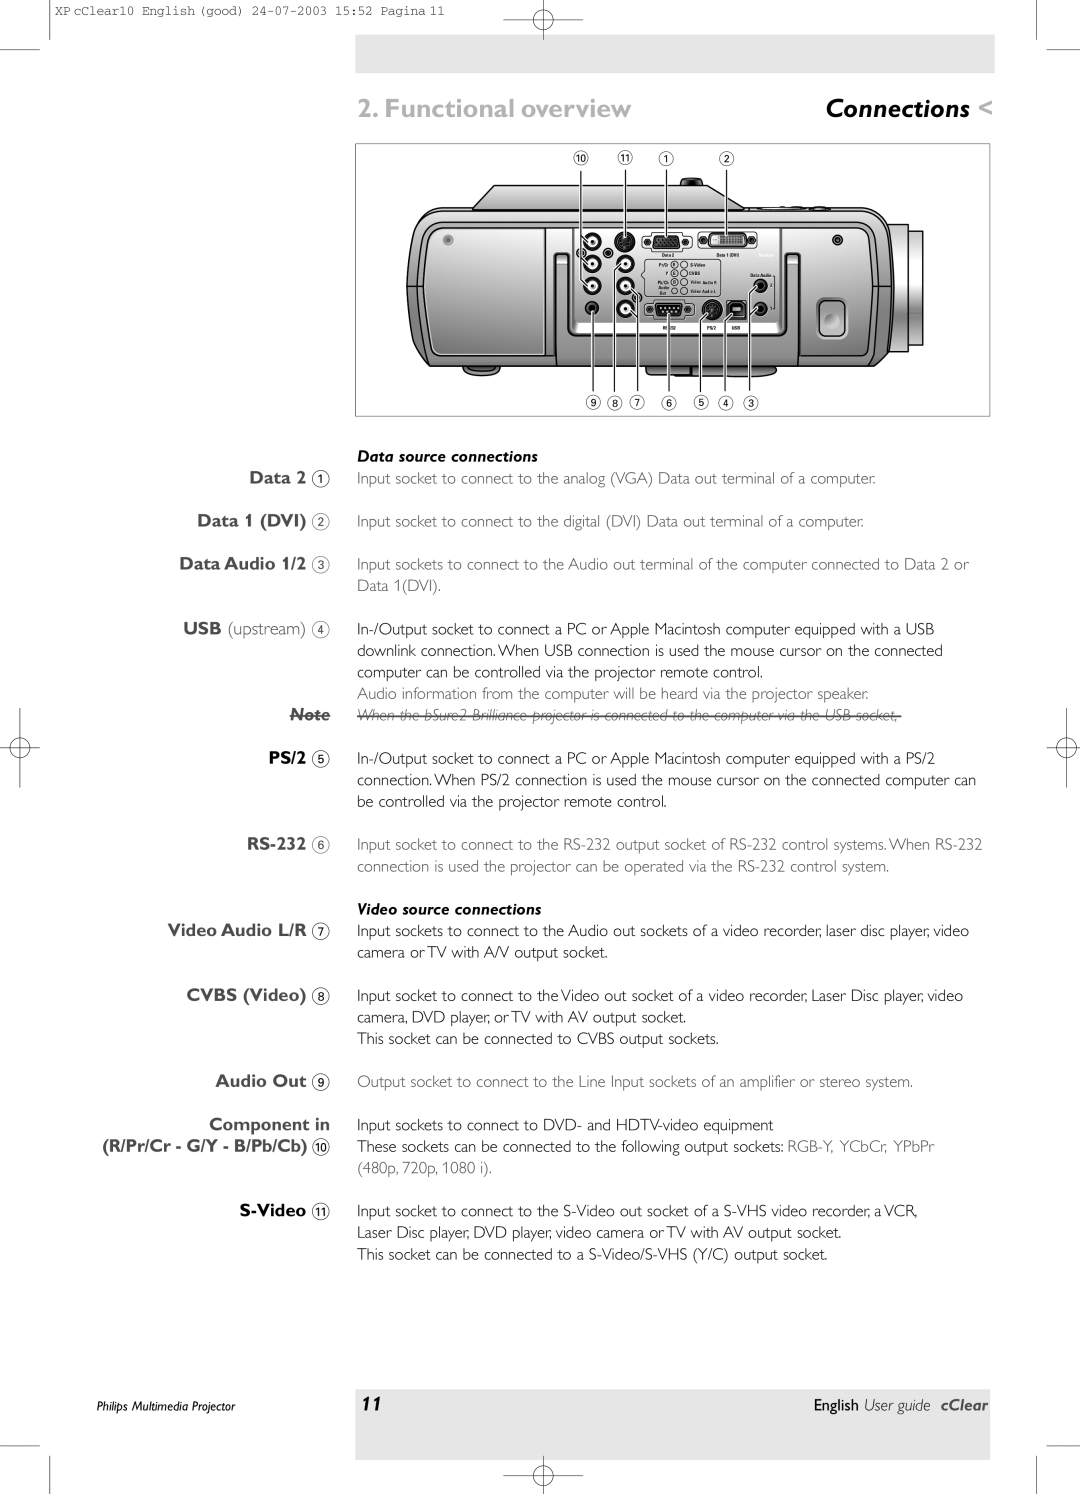 Philips bSure 1 manual Connections <, Data 2 Data 1 DVI Data Audio 1/2, PS/2, Functional overview, USB upstream 